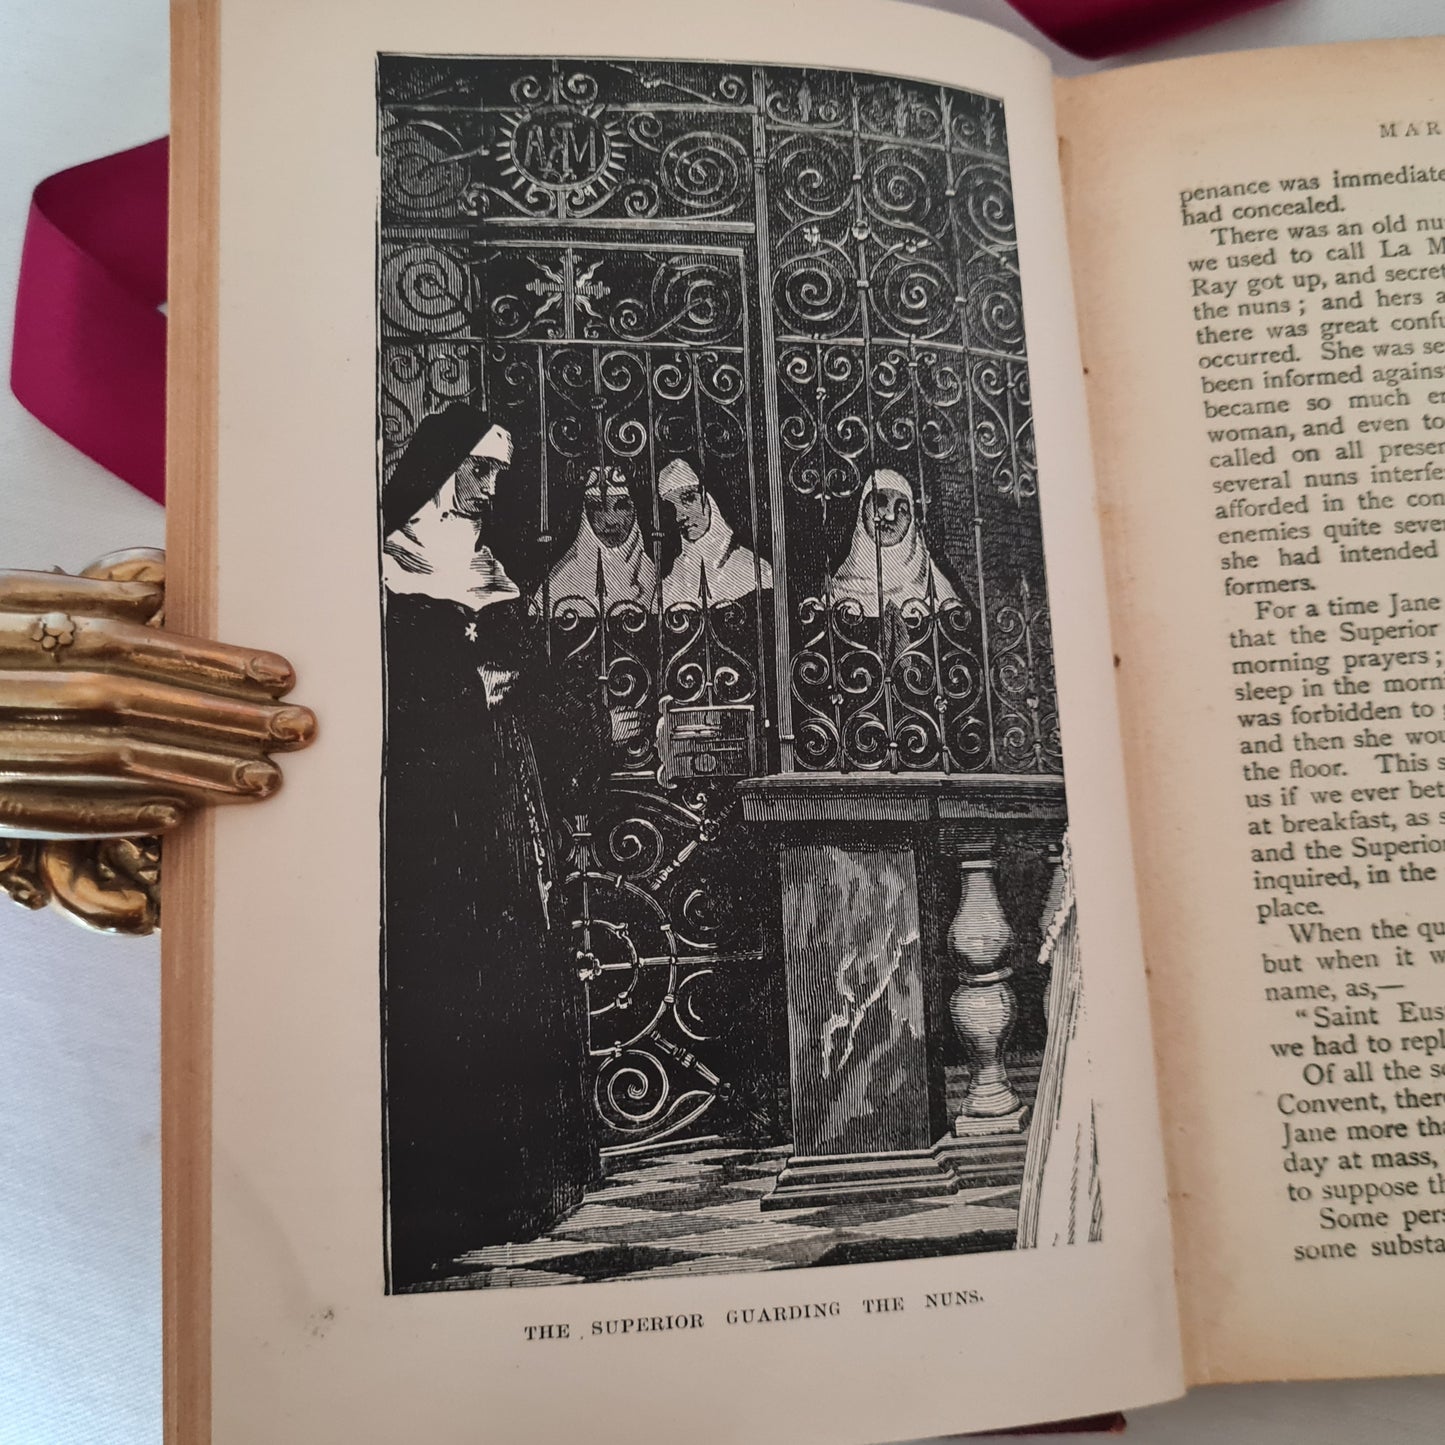 1890s Awful Disclosures of Maria Monk Exhibited in a Narrative of Her Sufferings, & The Nun - Six Months in a Convent / Very Good Condition